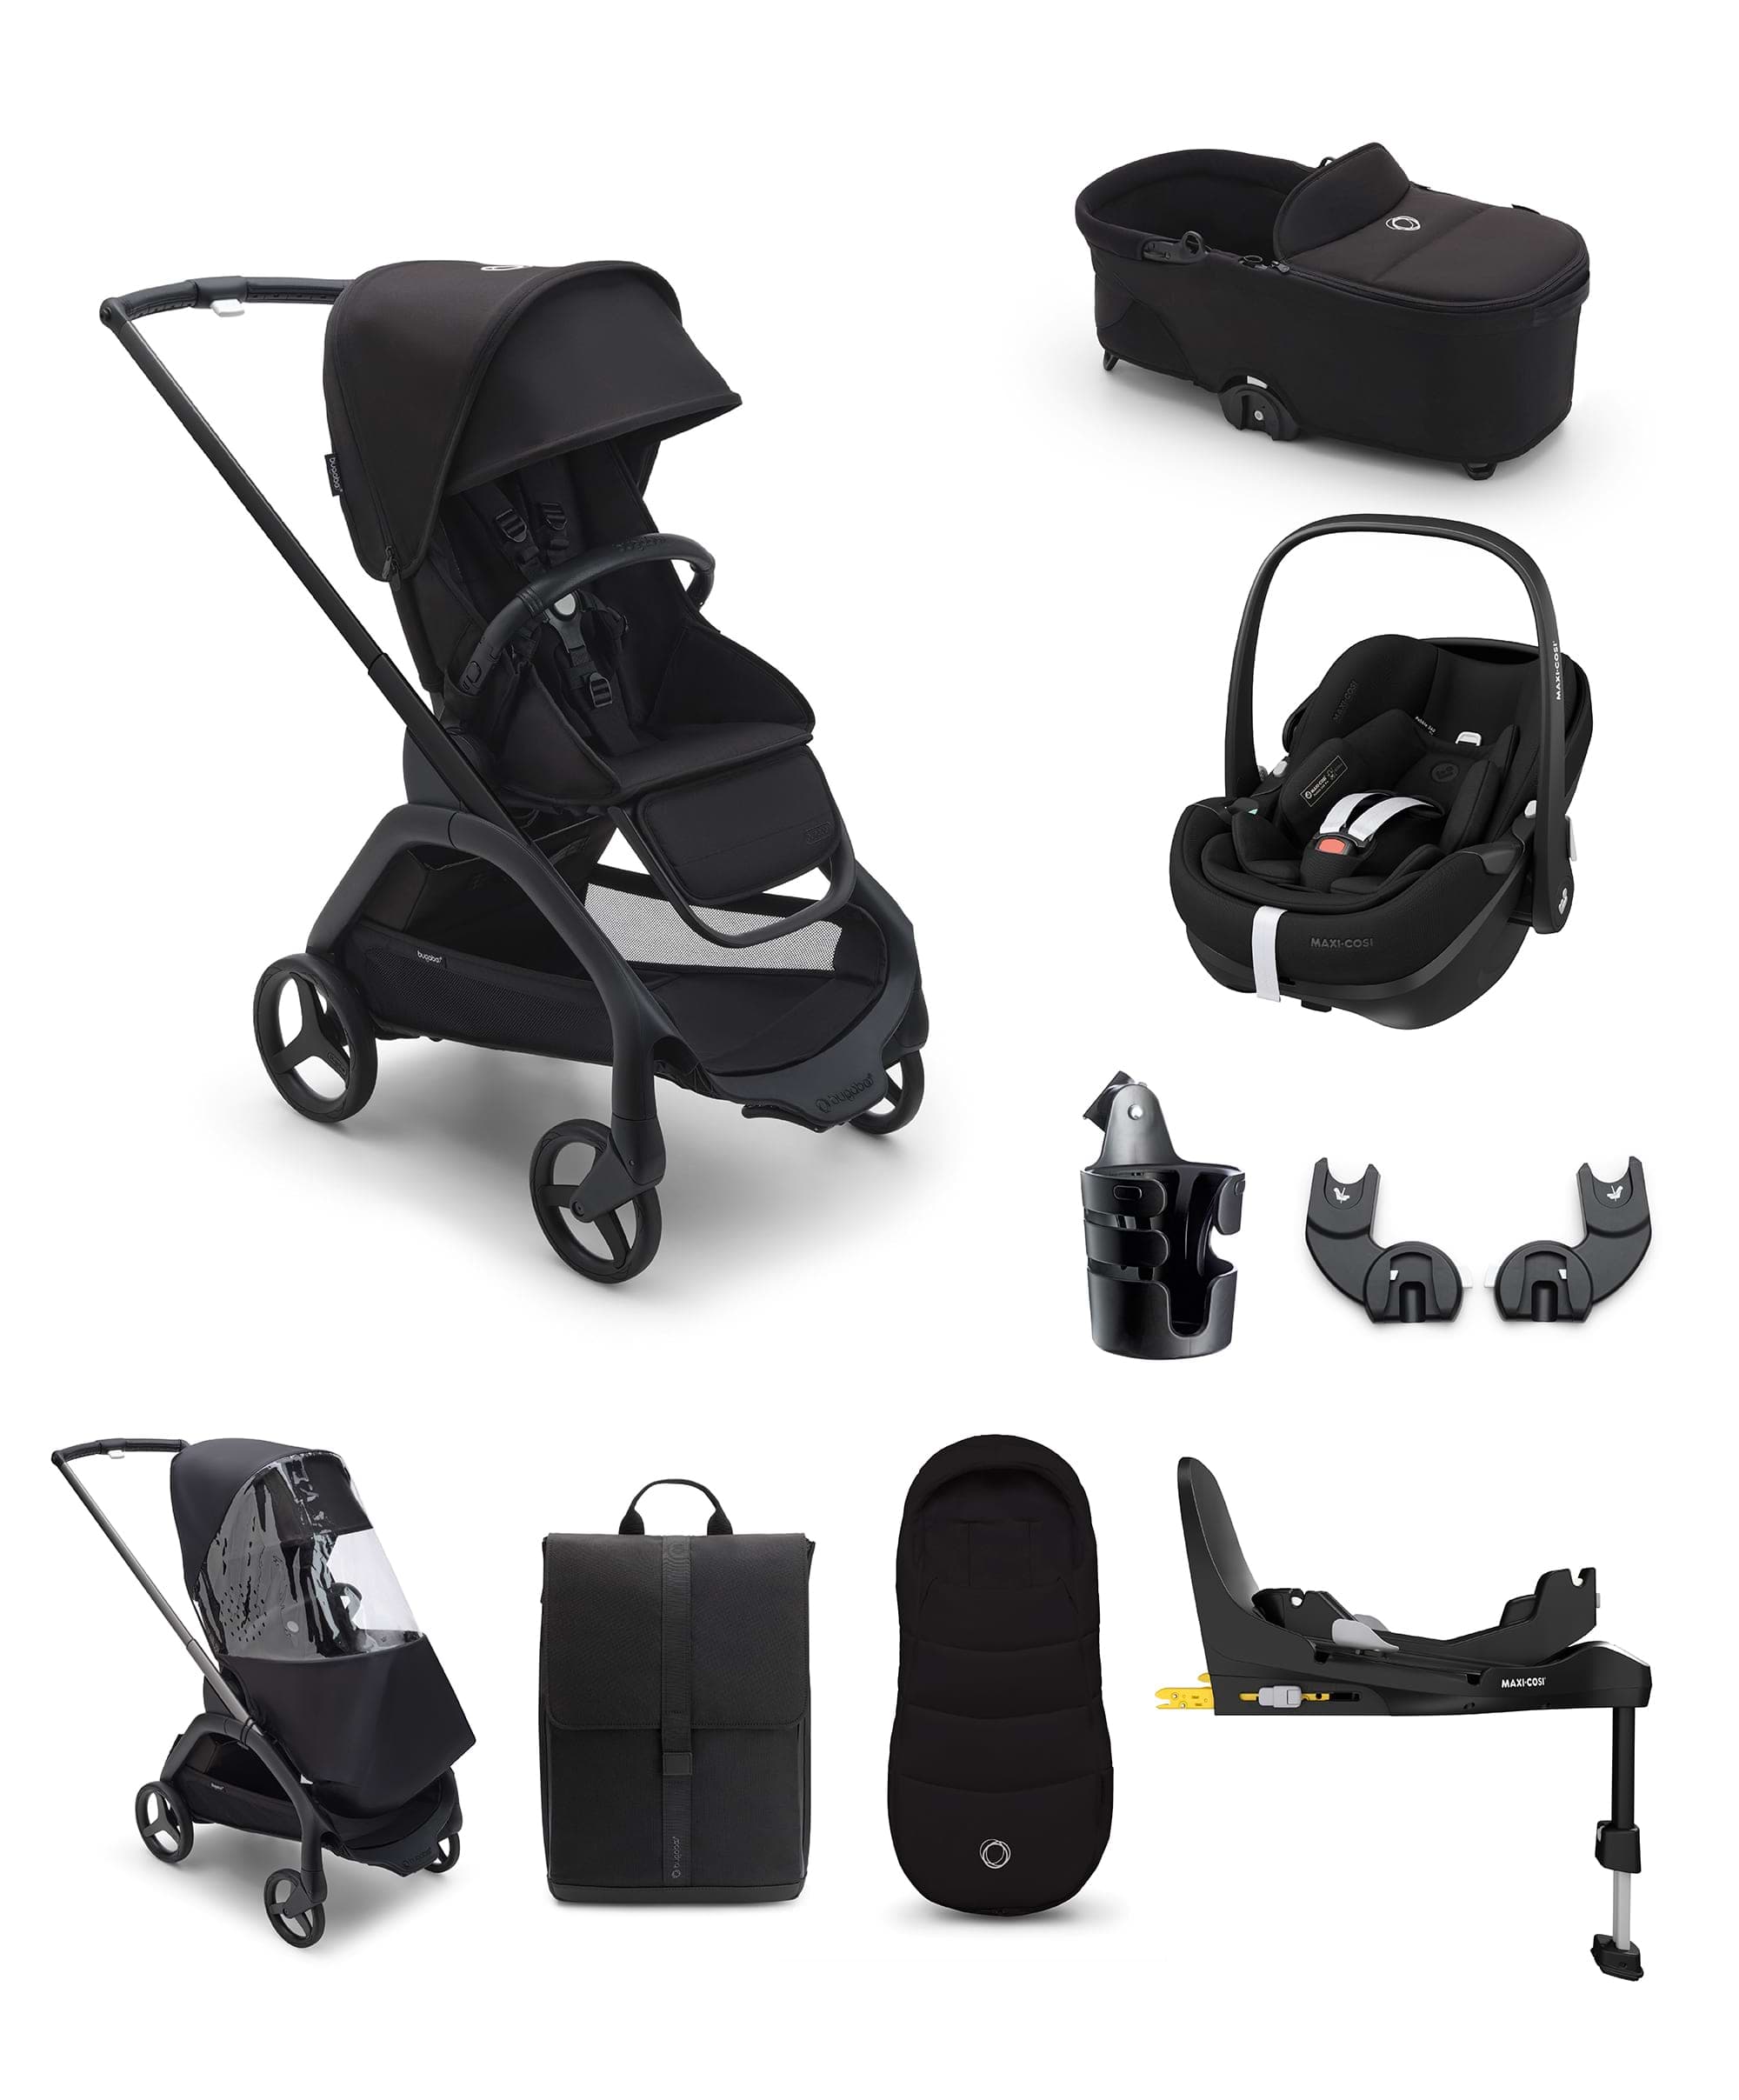 Bugaboo Dragonfly Ultimate 9 Piece Bundle with Maxi Cosi Pebble Pro 360 Car Seat and Base in Black